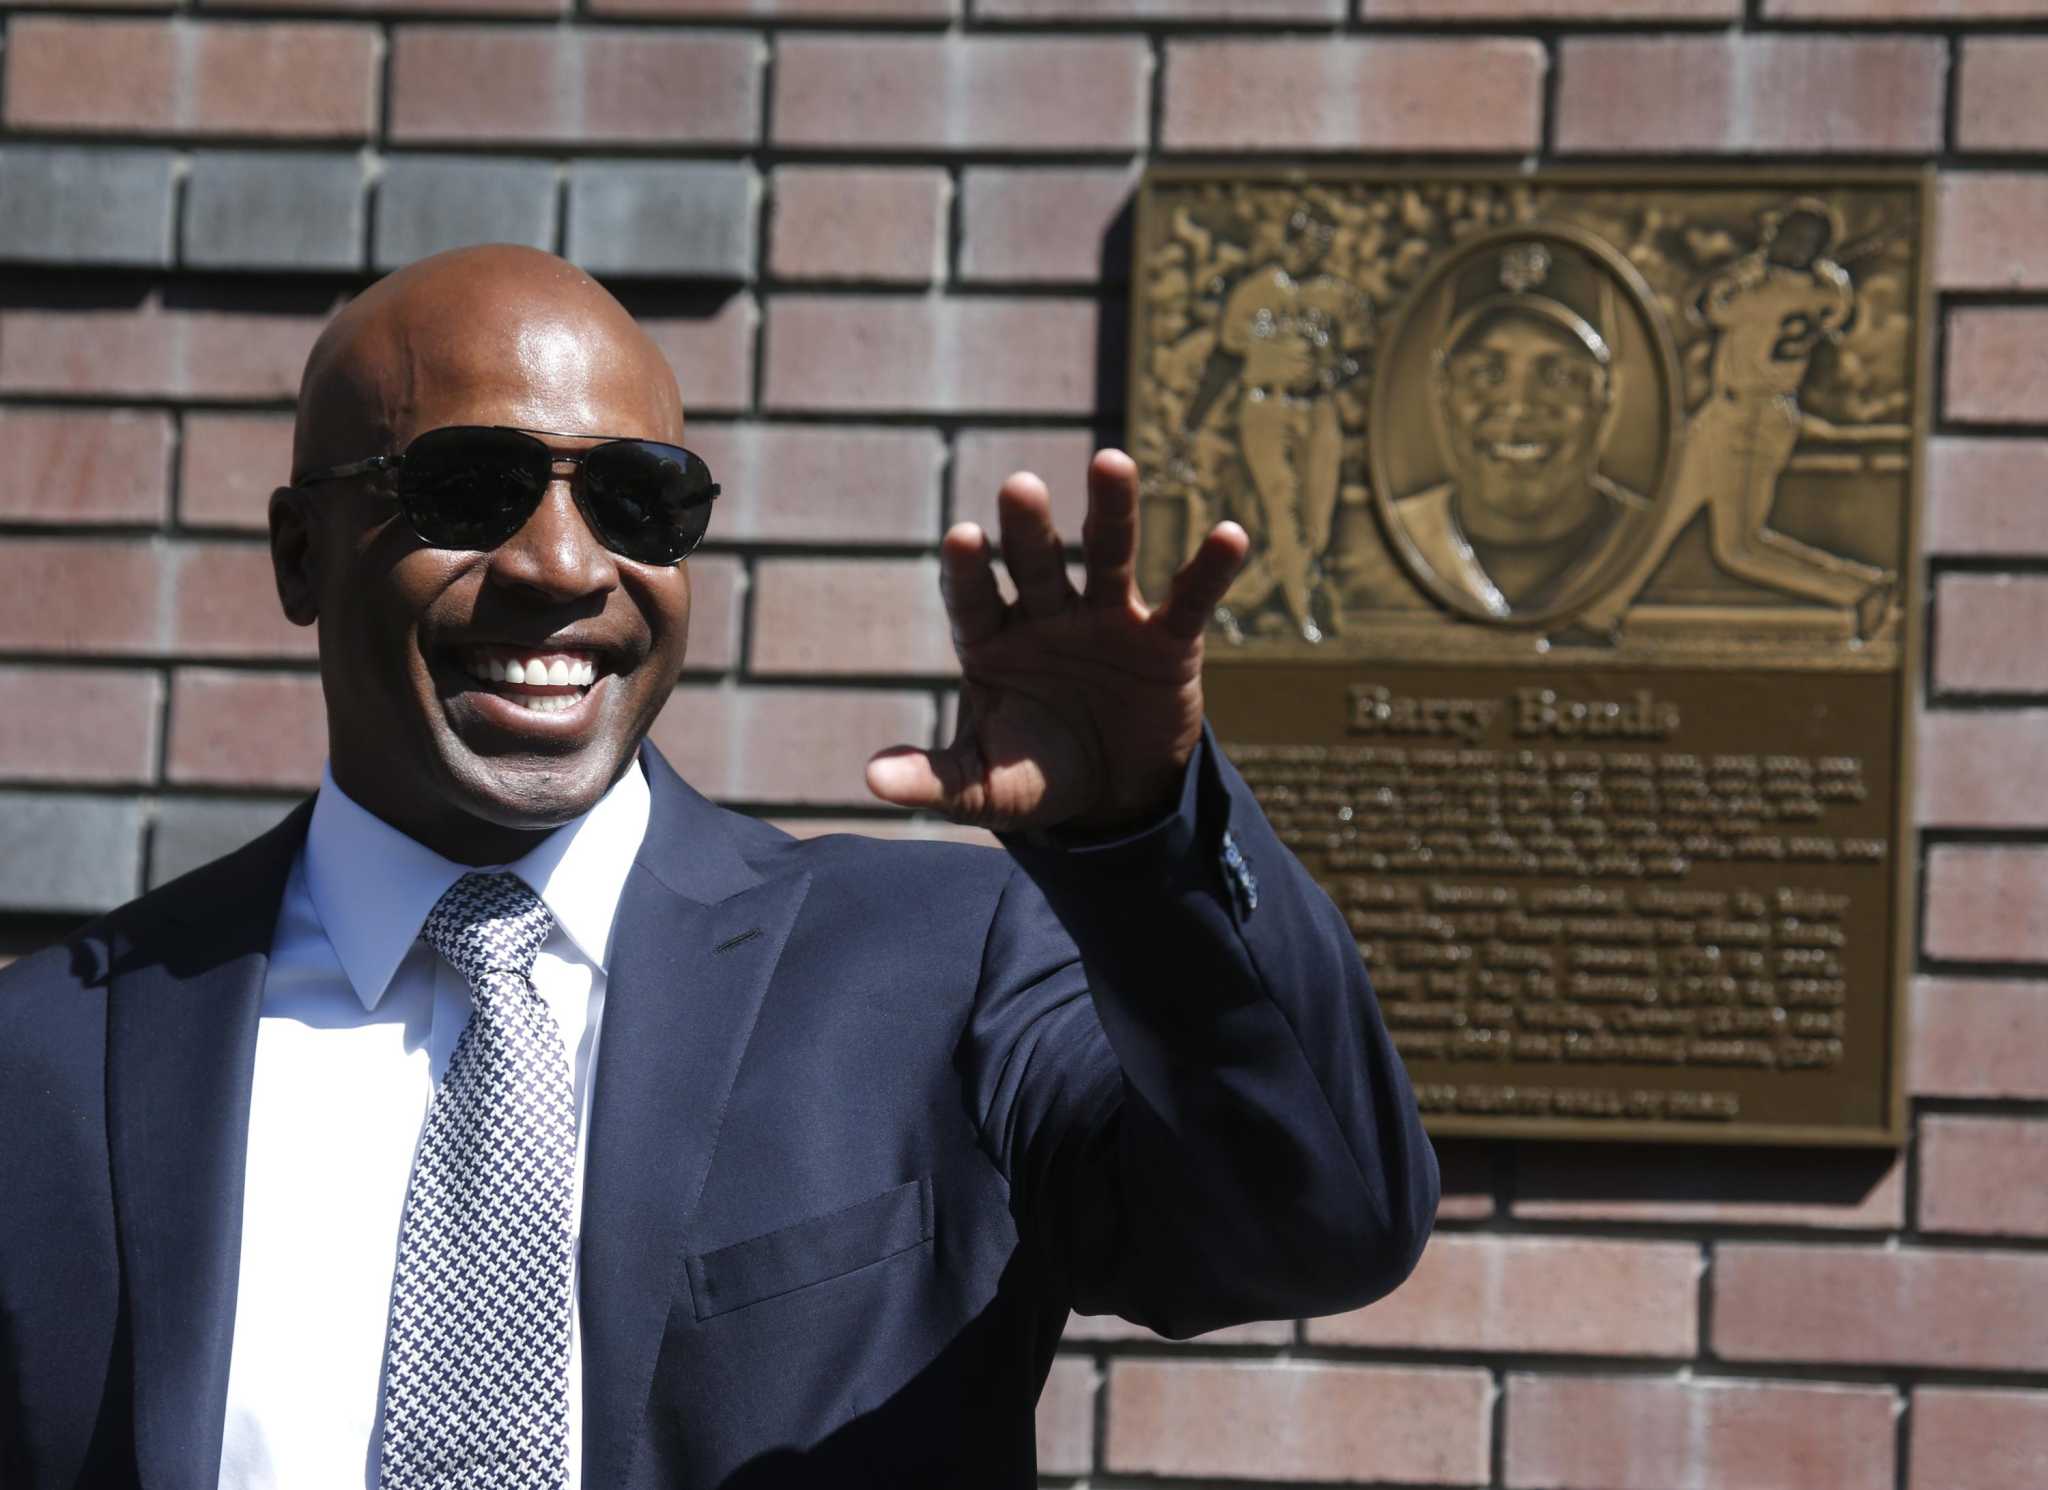 Barry Bonds is the greatest player of all time; put him in the Hall of Fame  – The Daily Evergreen